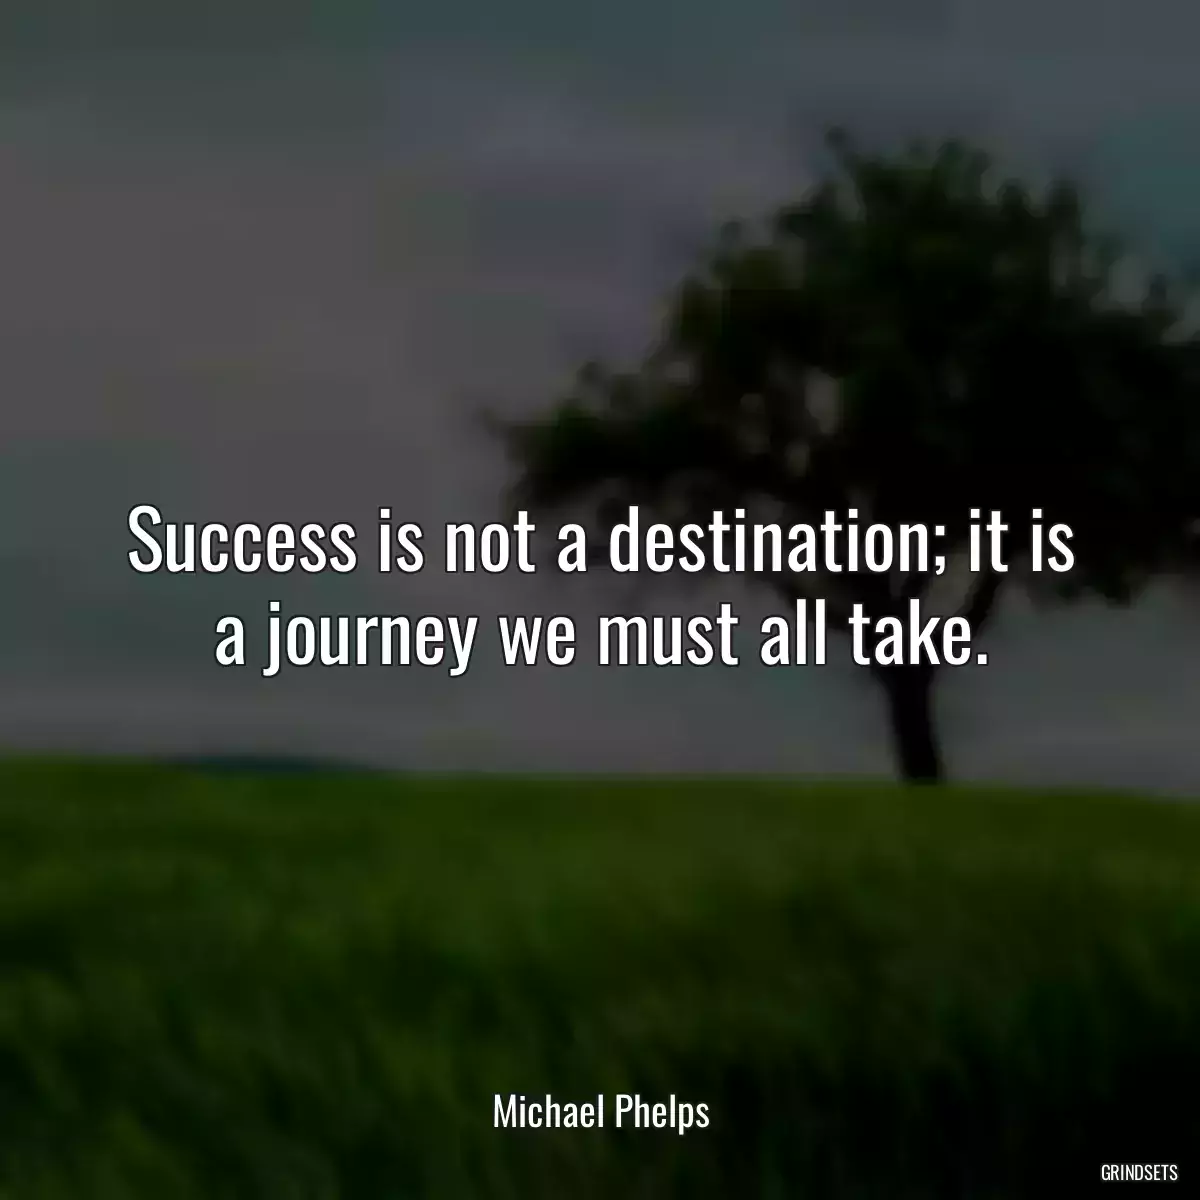 Success is not a destination; it is a journey we must all take.